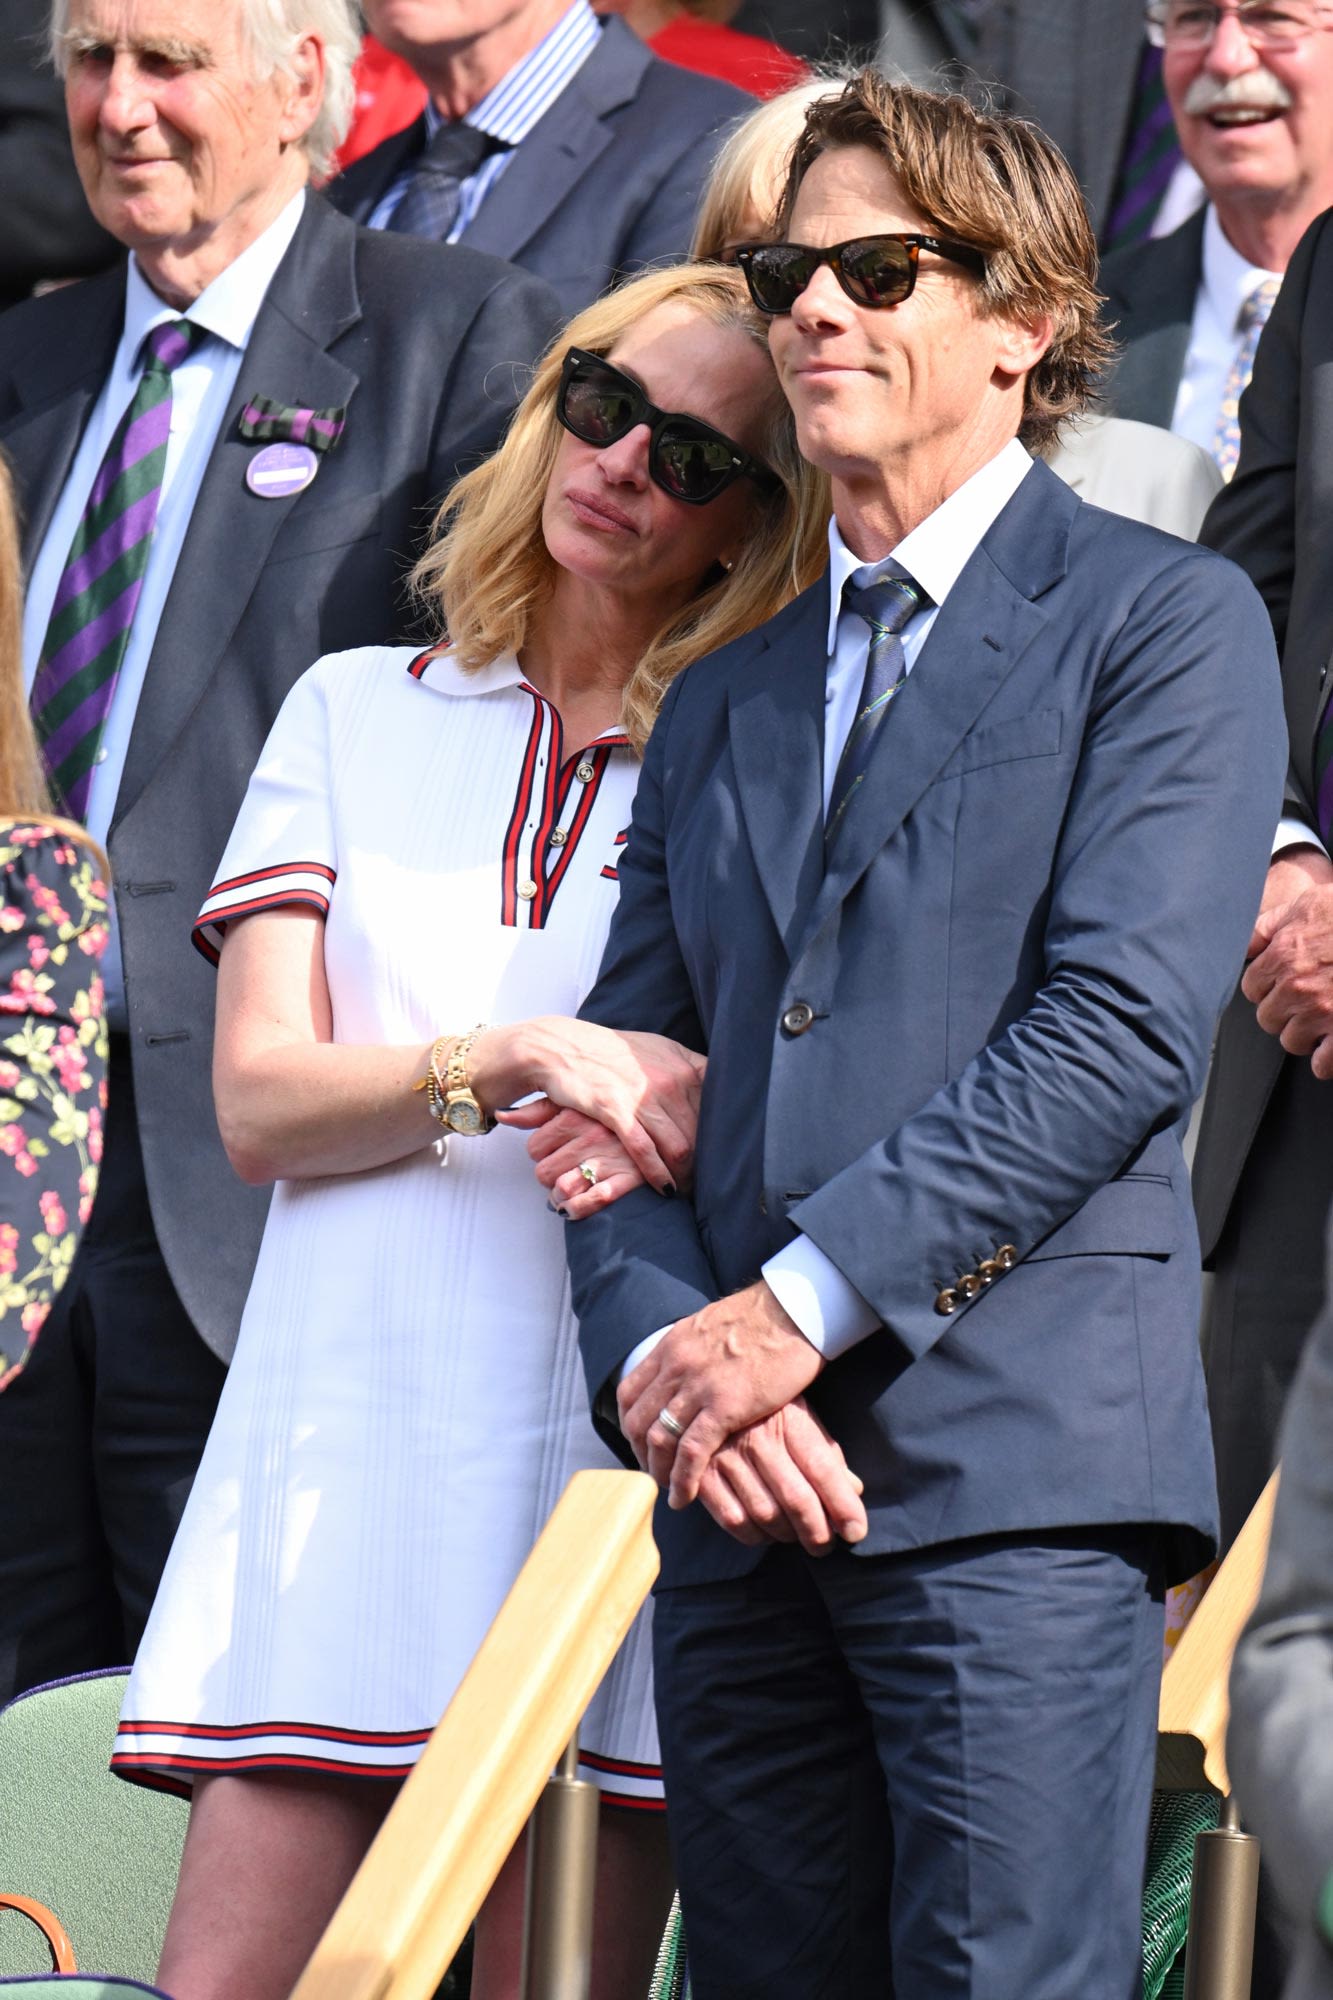 Julia Roberts Steps Out With Husband Danny Moder at Wimbledon for First Time in 2 Years